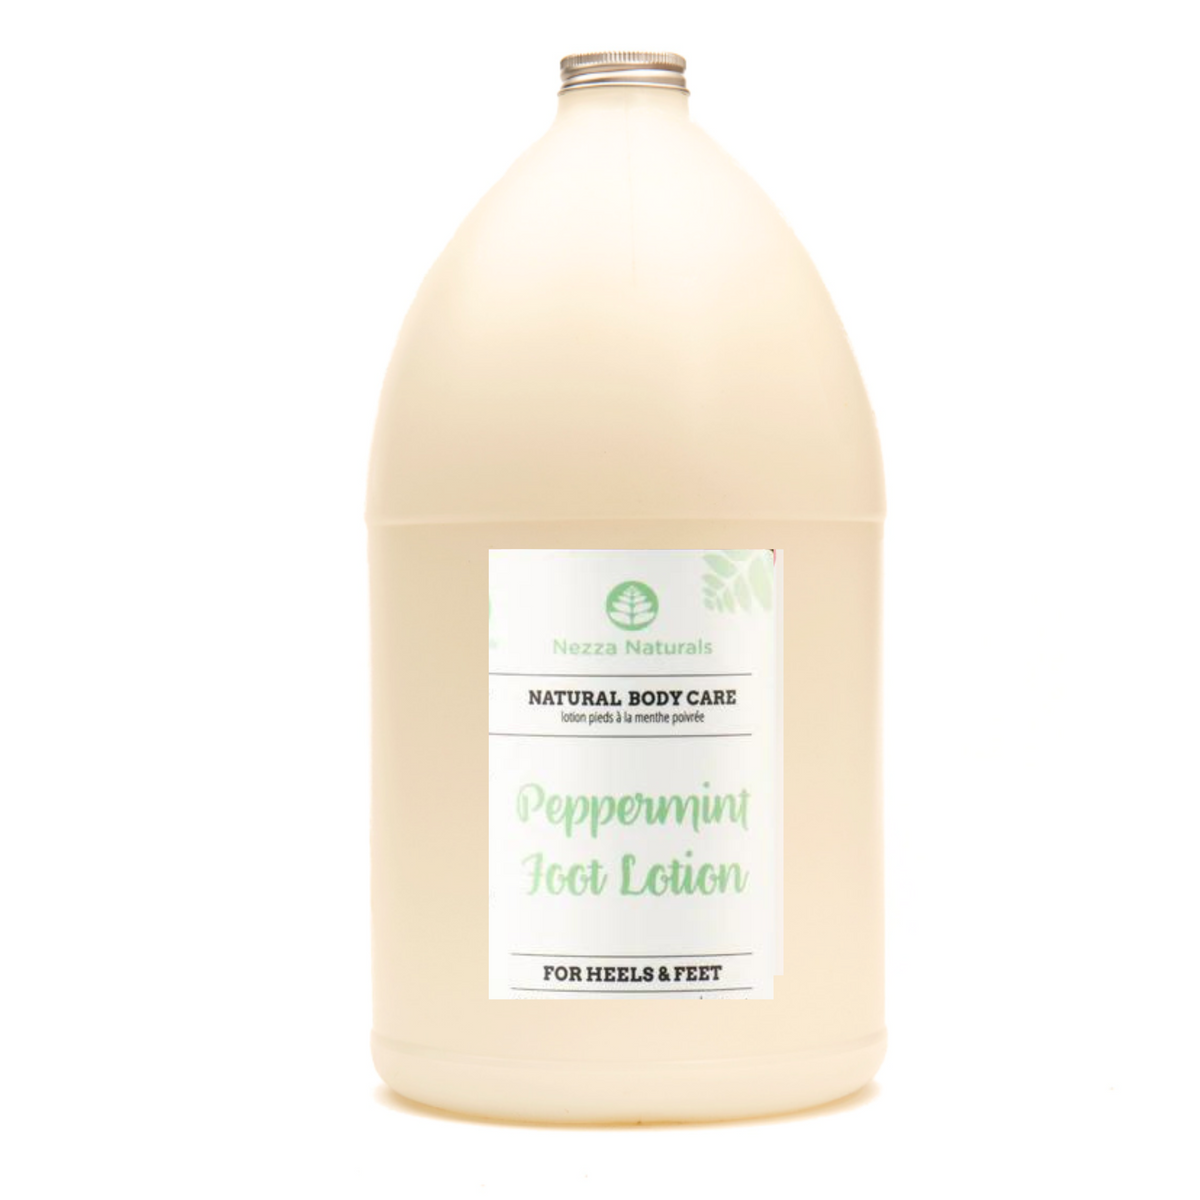 Peppermint Foot Lotion - 4L